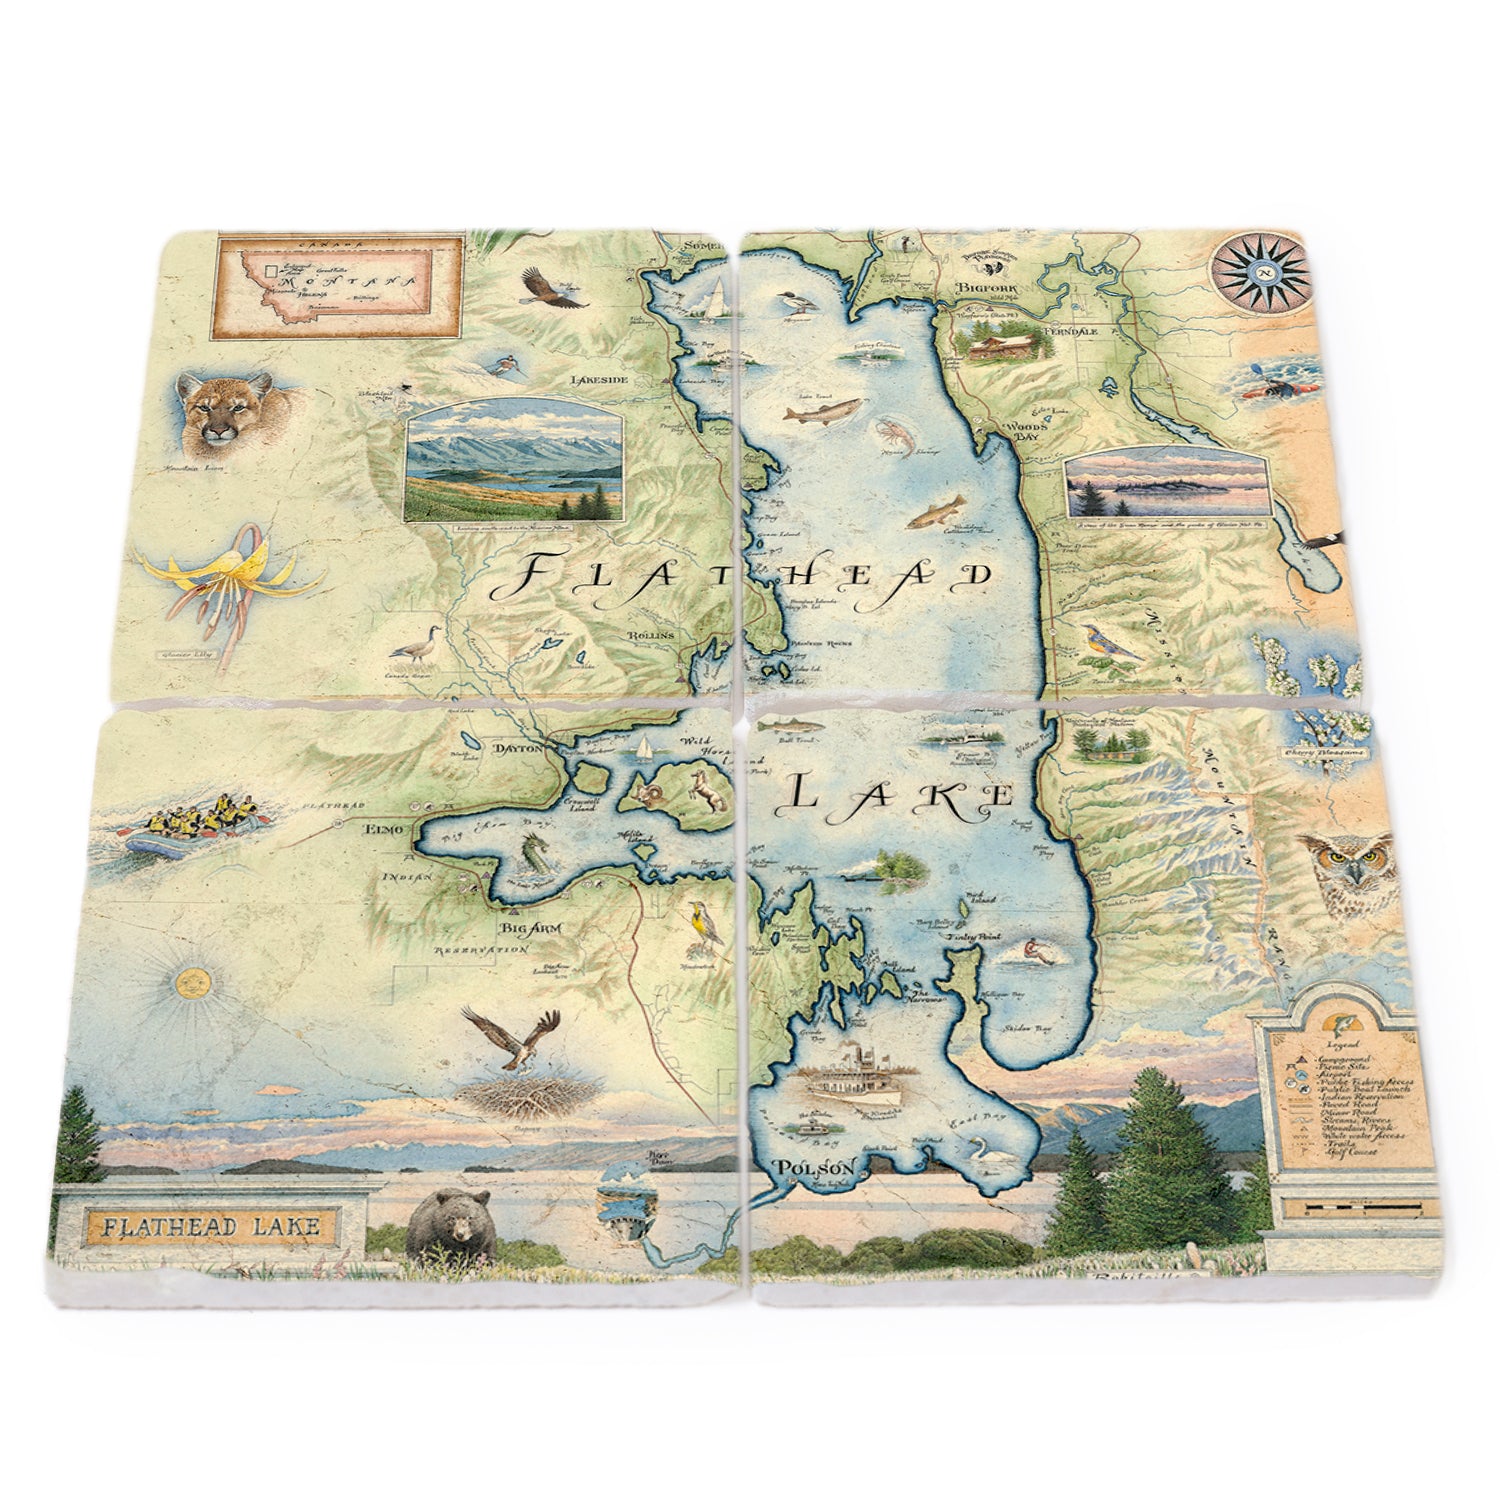 Montana's Flathead Lake Natural Stone Coaster Set of 4 by Xplorer Maps. Features Golfing, Steamboat, Rafting, birds, eagles, Osprey, Bears, forest, water, deer, mountain lion, fish, Cherry Blossoms, and flowers like Glacier Lilies and Lady Slippers. Cities and landmarks are noted such as Woods Bay, Wild Horse Island, Finley Point, and Big Arm. 